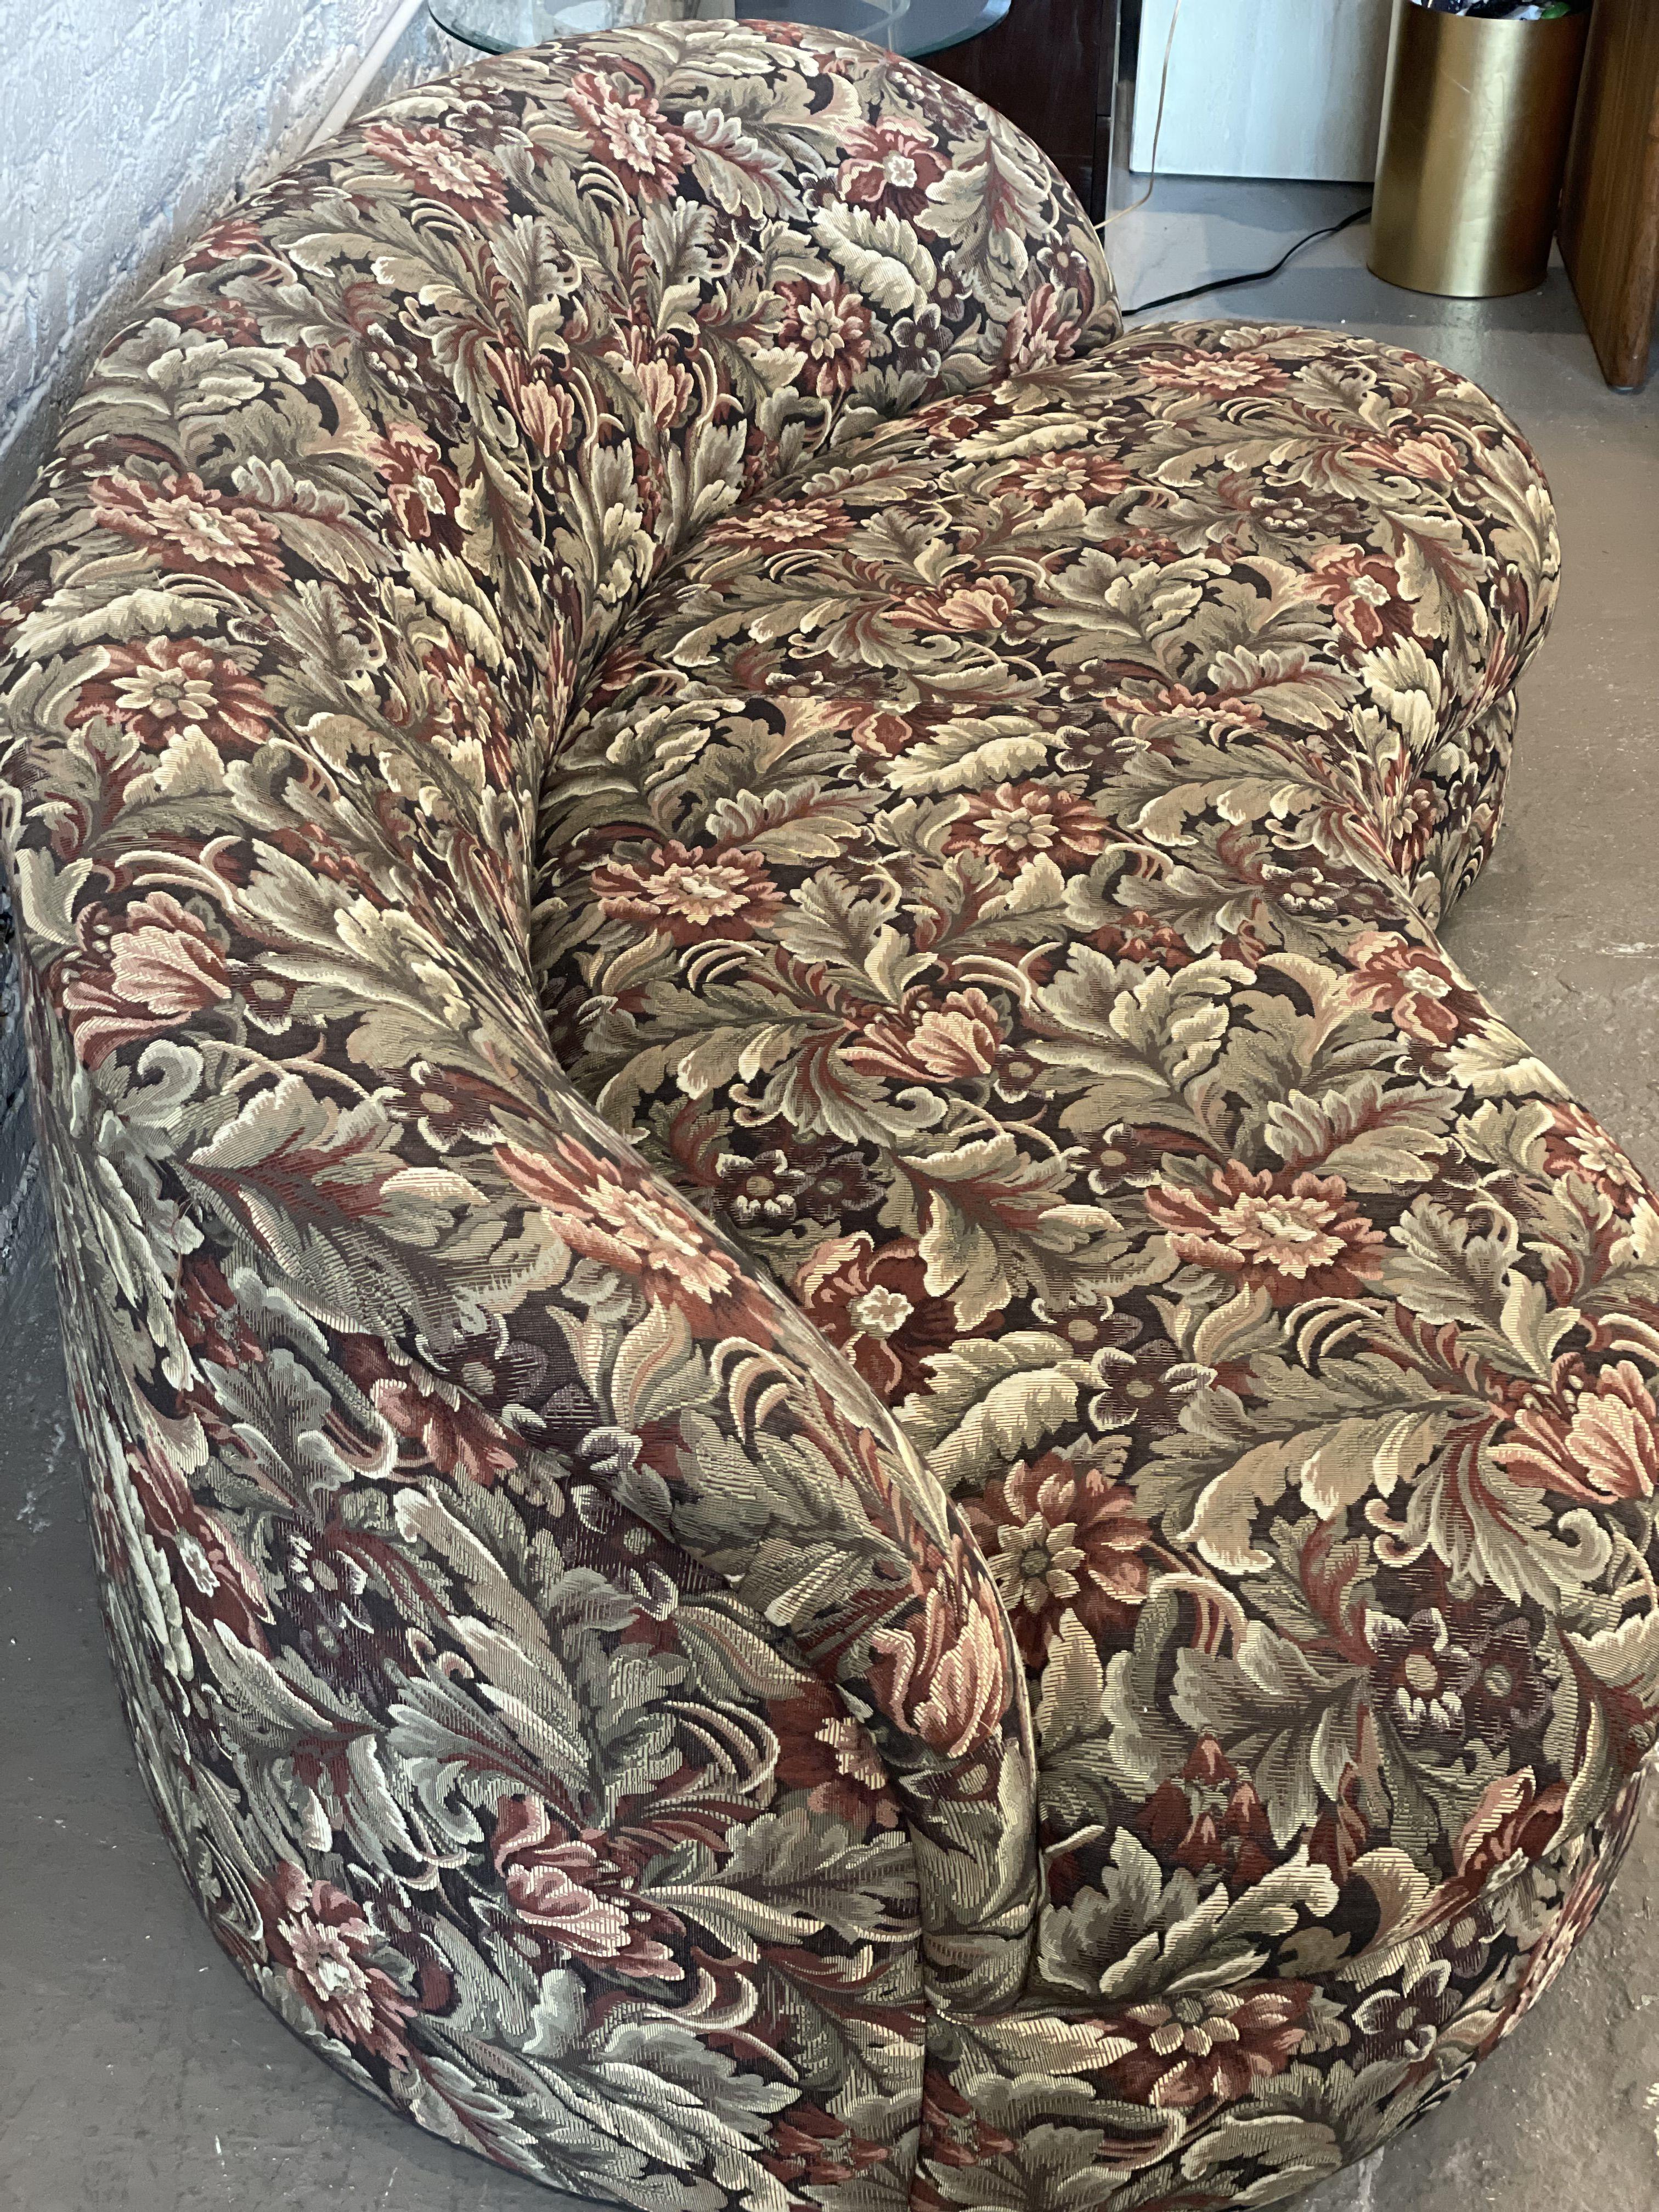 Oooh what a good shape! I can see this in a banquette or living area. The cushion foam and fabric are in excellent condition although you may want to redo the fabric:).